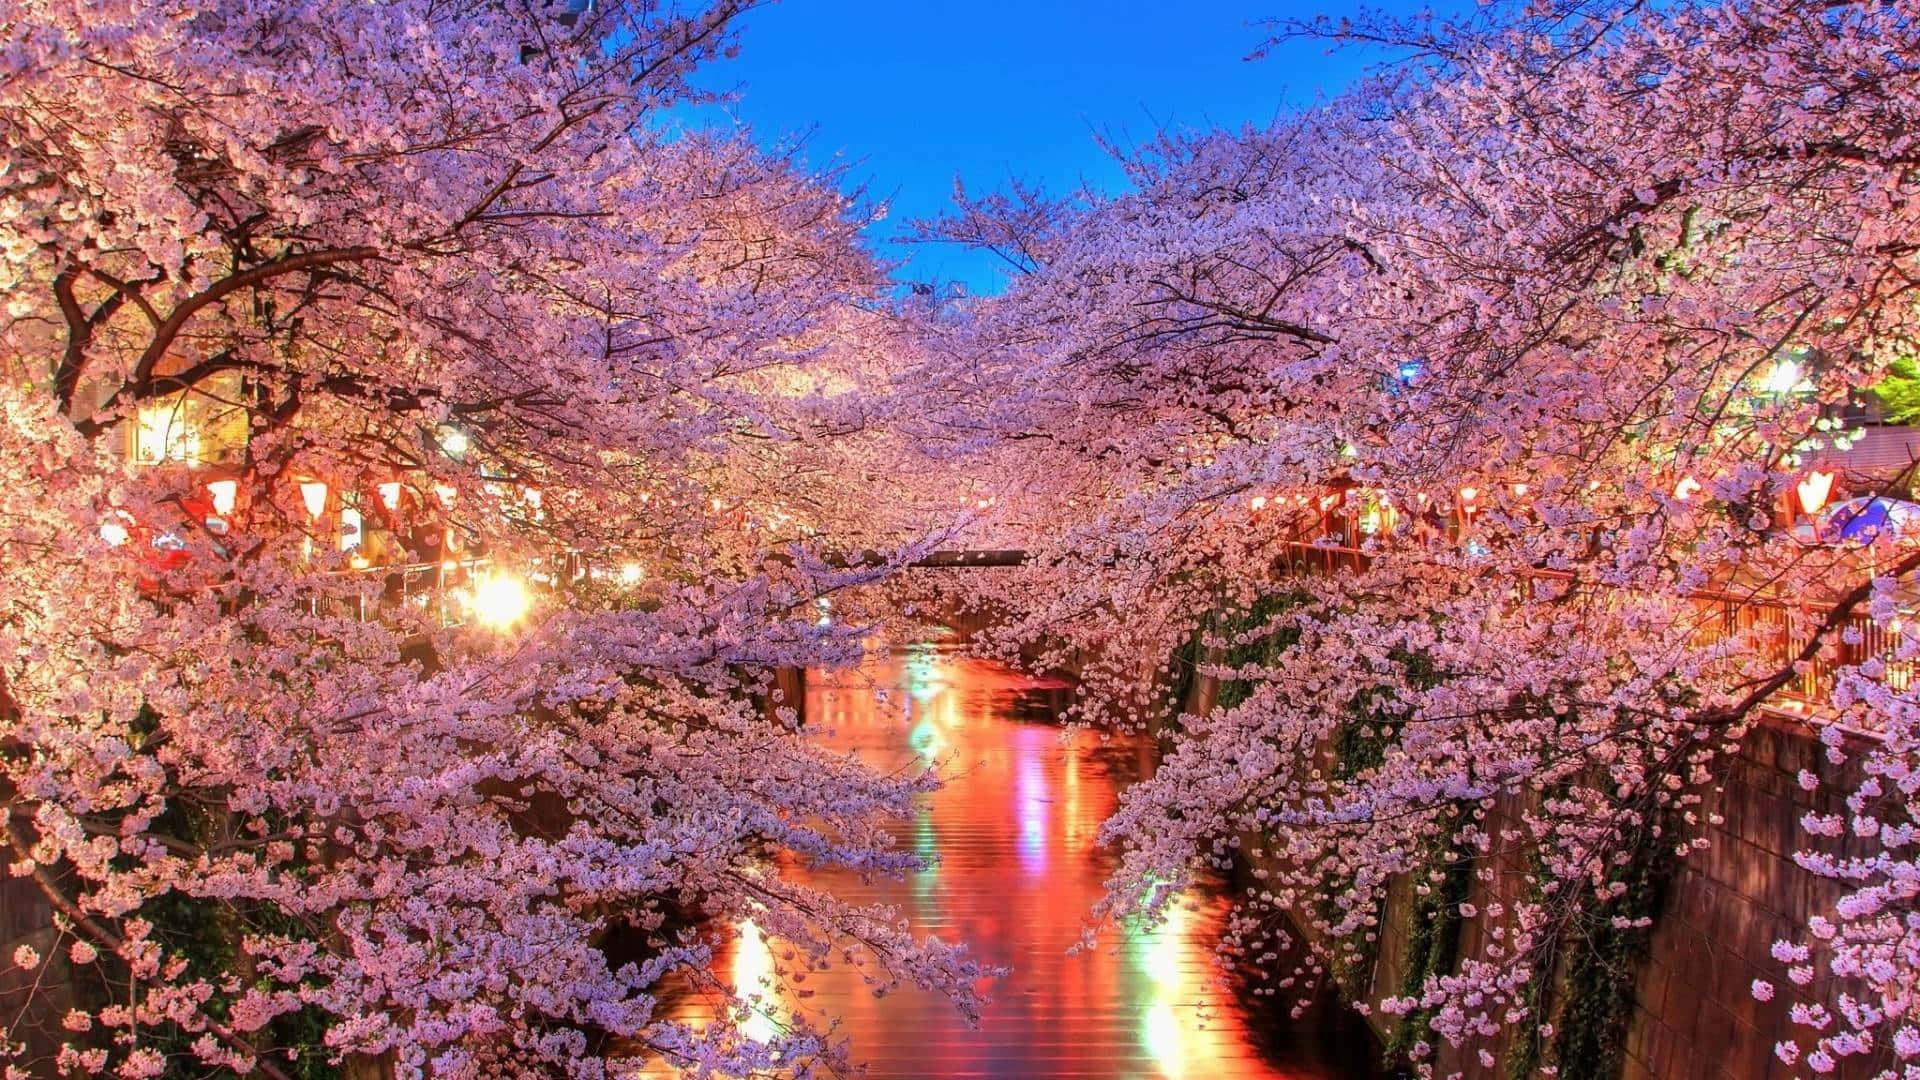 A River Lined With Cherry Blossoms At Night Wallpaper